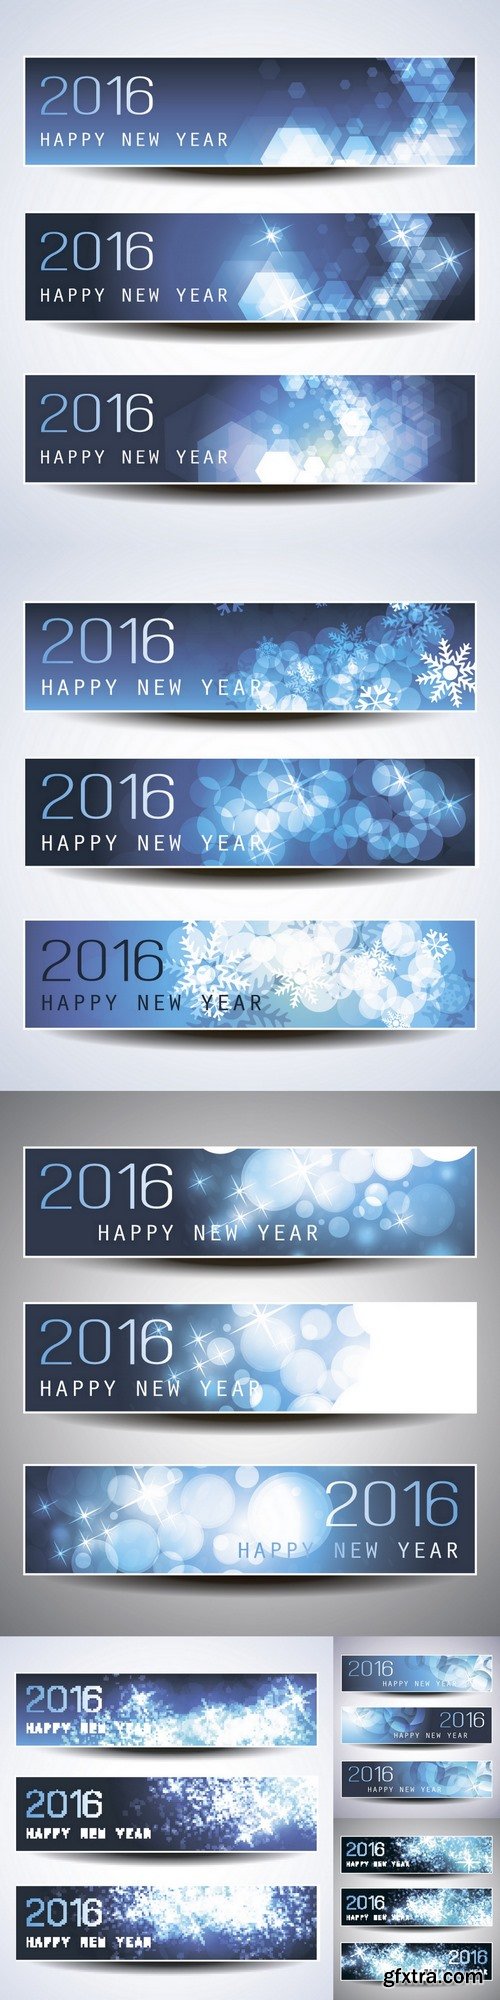 Old New Year Banners